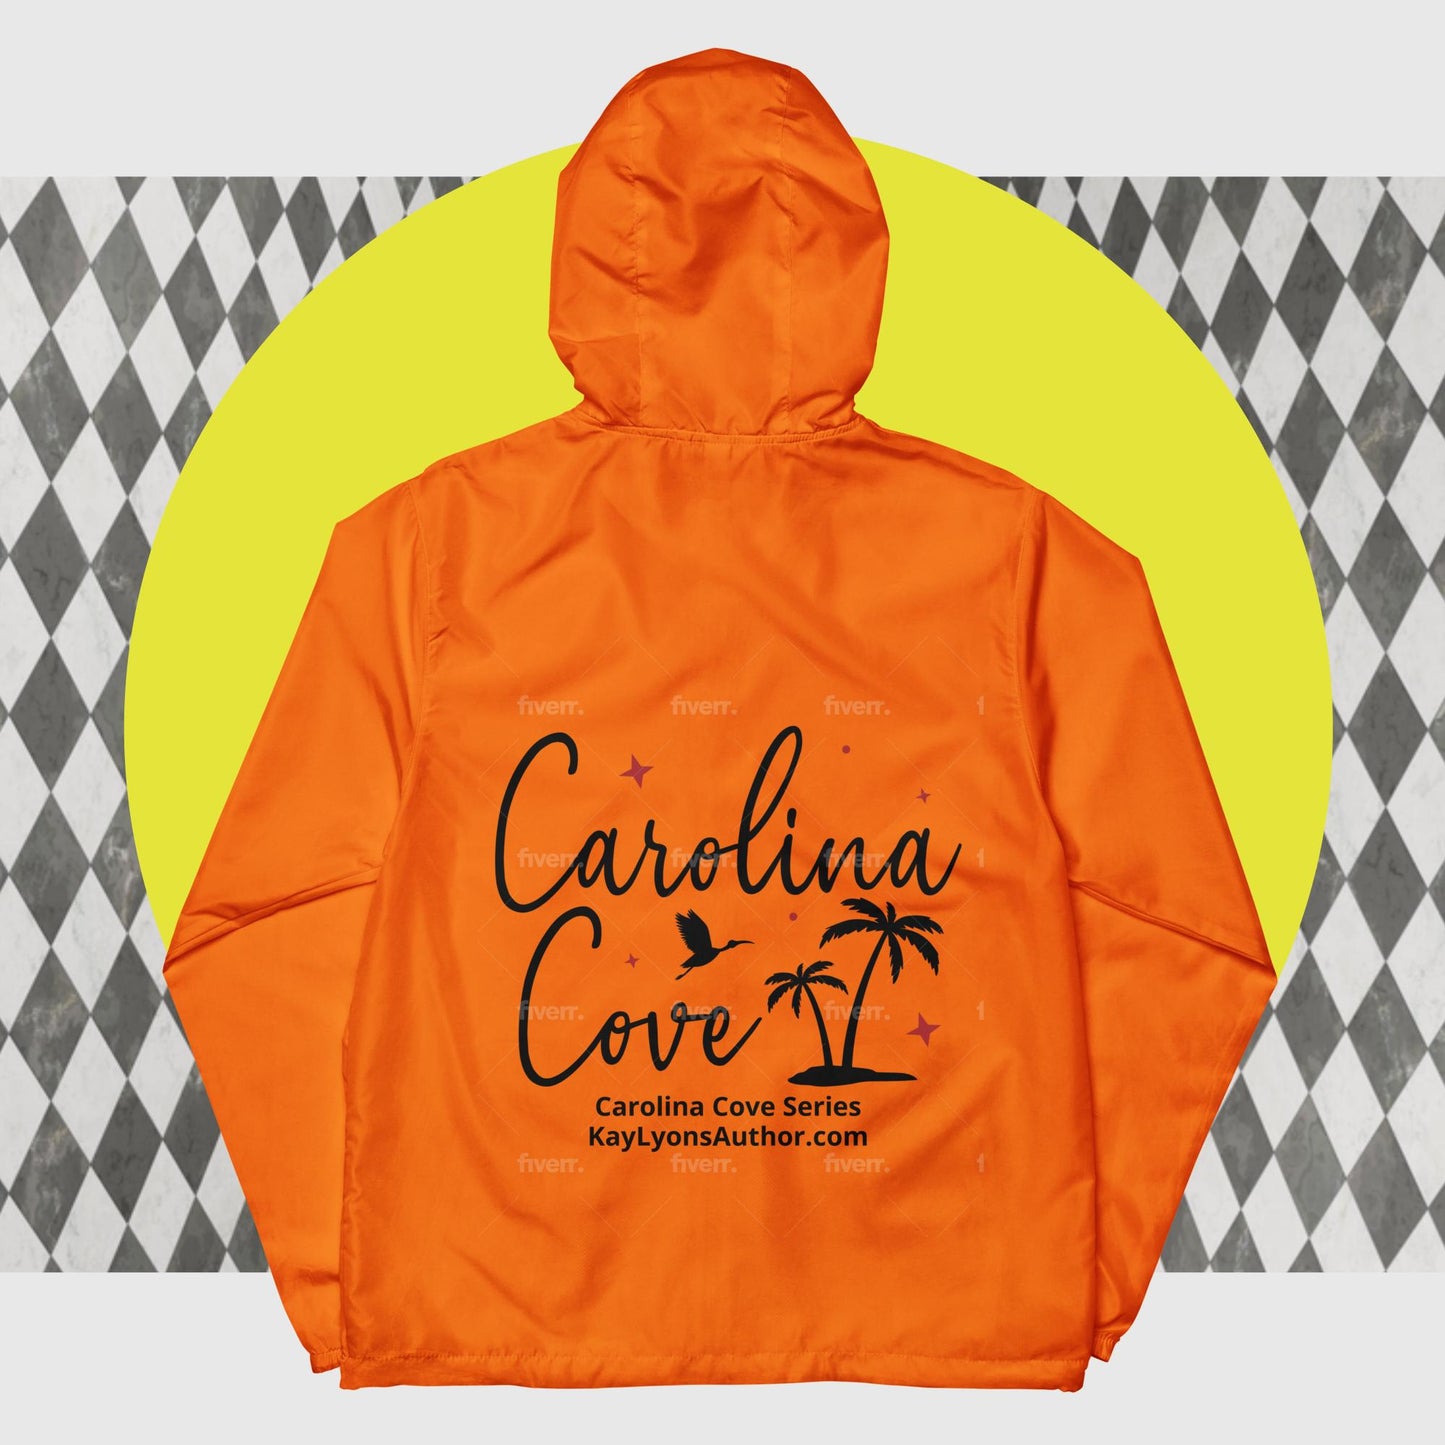 Unisex lightweight zip up windbreaker FEATURING CAROLINA COVE FROM THE CAROLINA COVE/MAKE ME A MATCH/SEASIDE SISTERS/BLACKWELL BROTHERS SERIES!